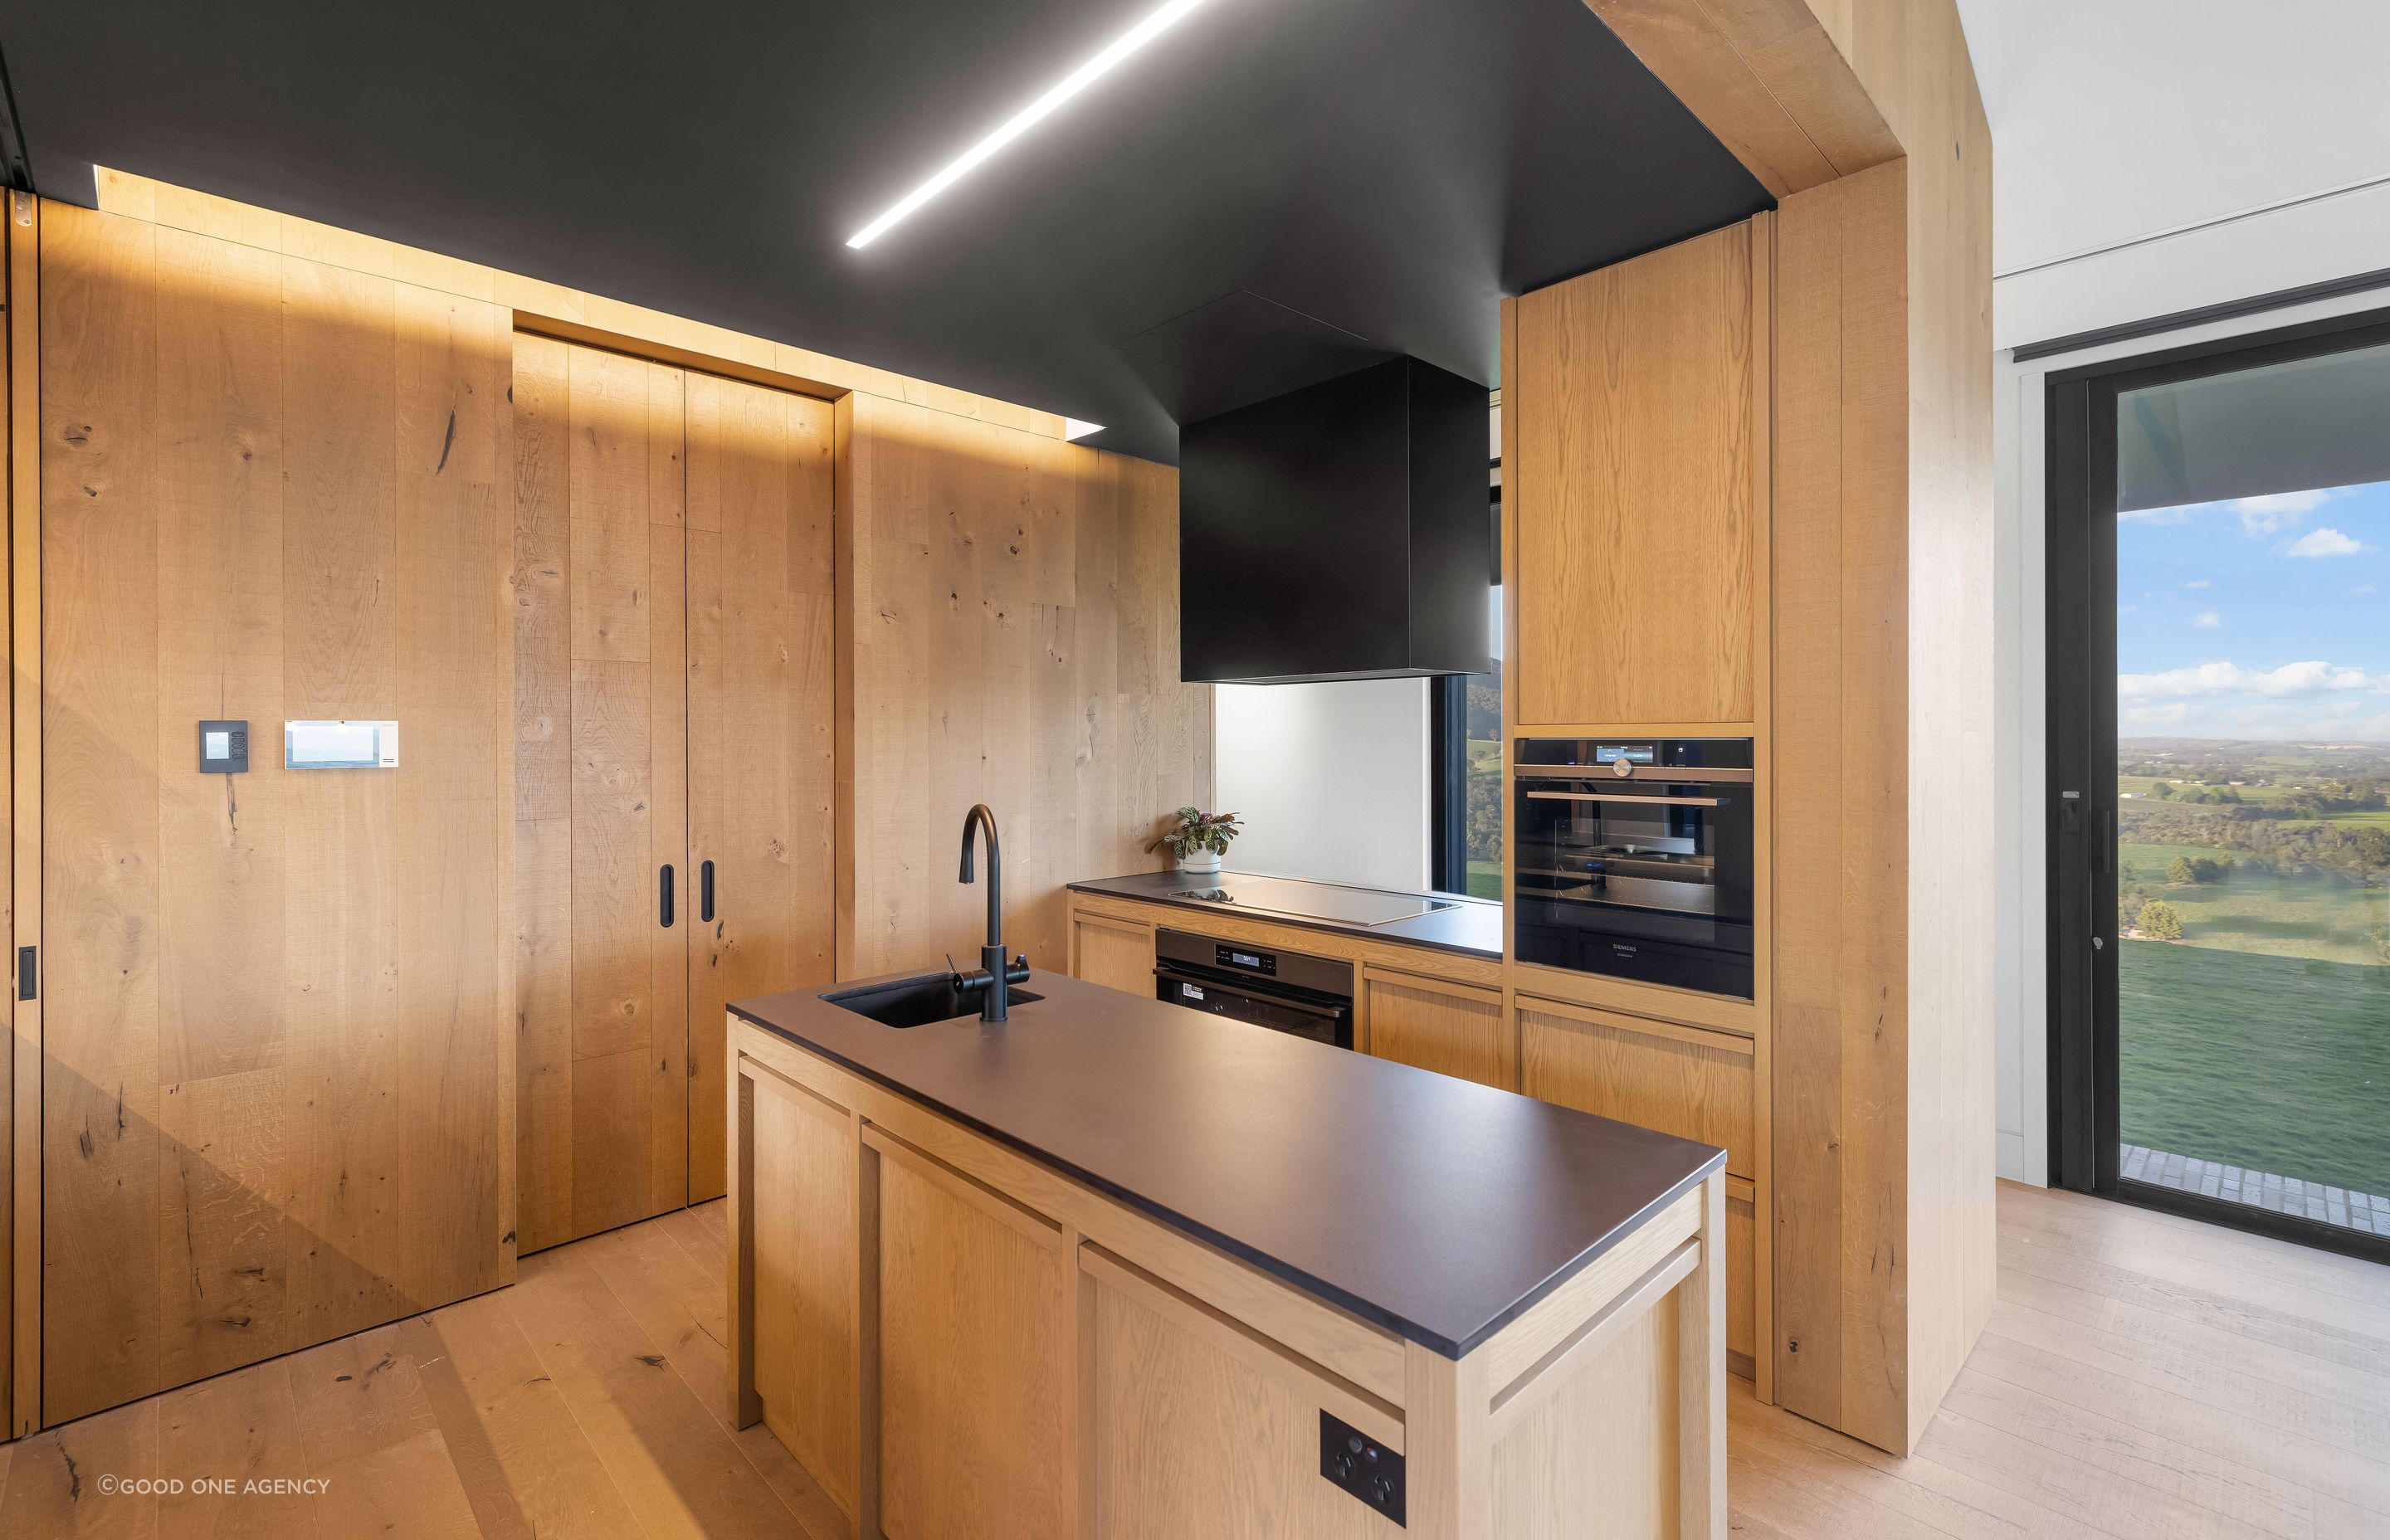 The timber kitchen with rich dark accents